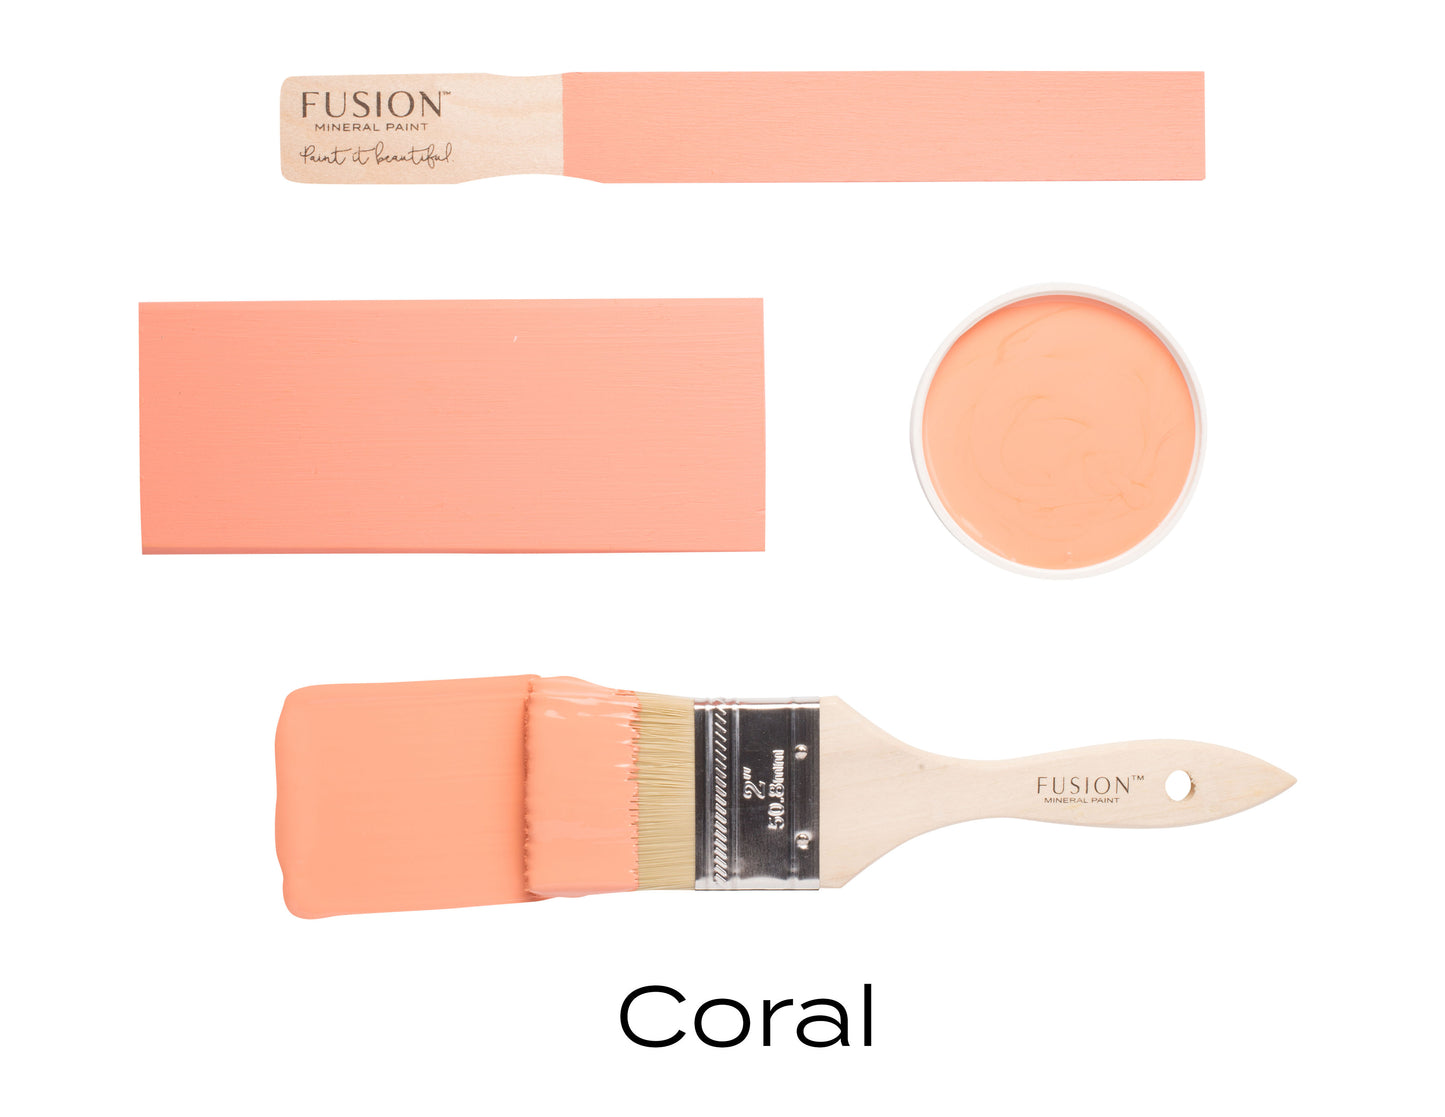 Coral * Limited Edition